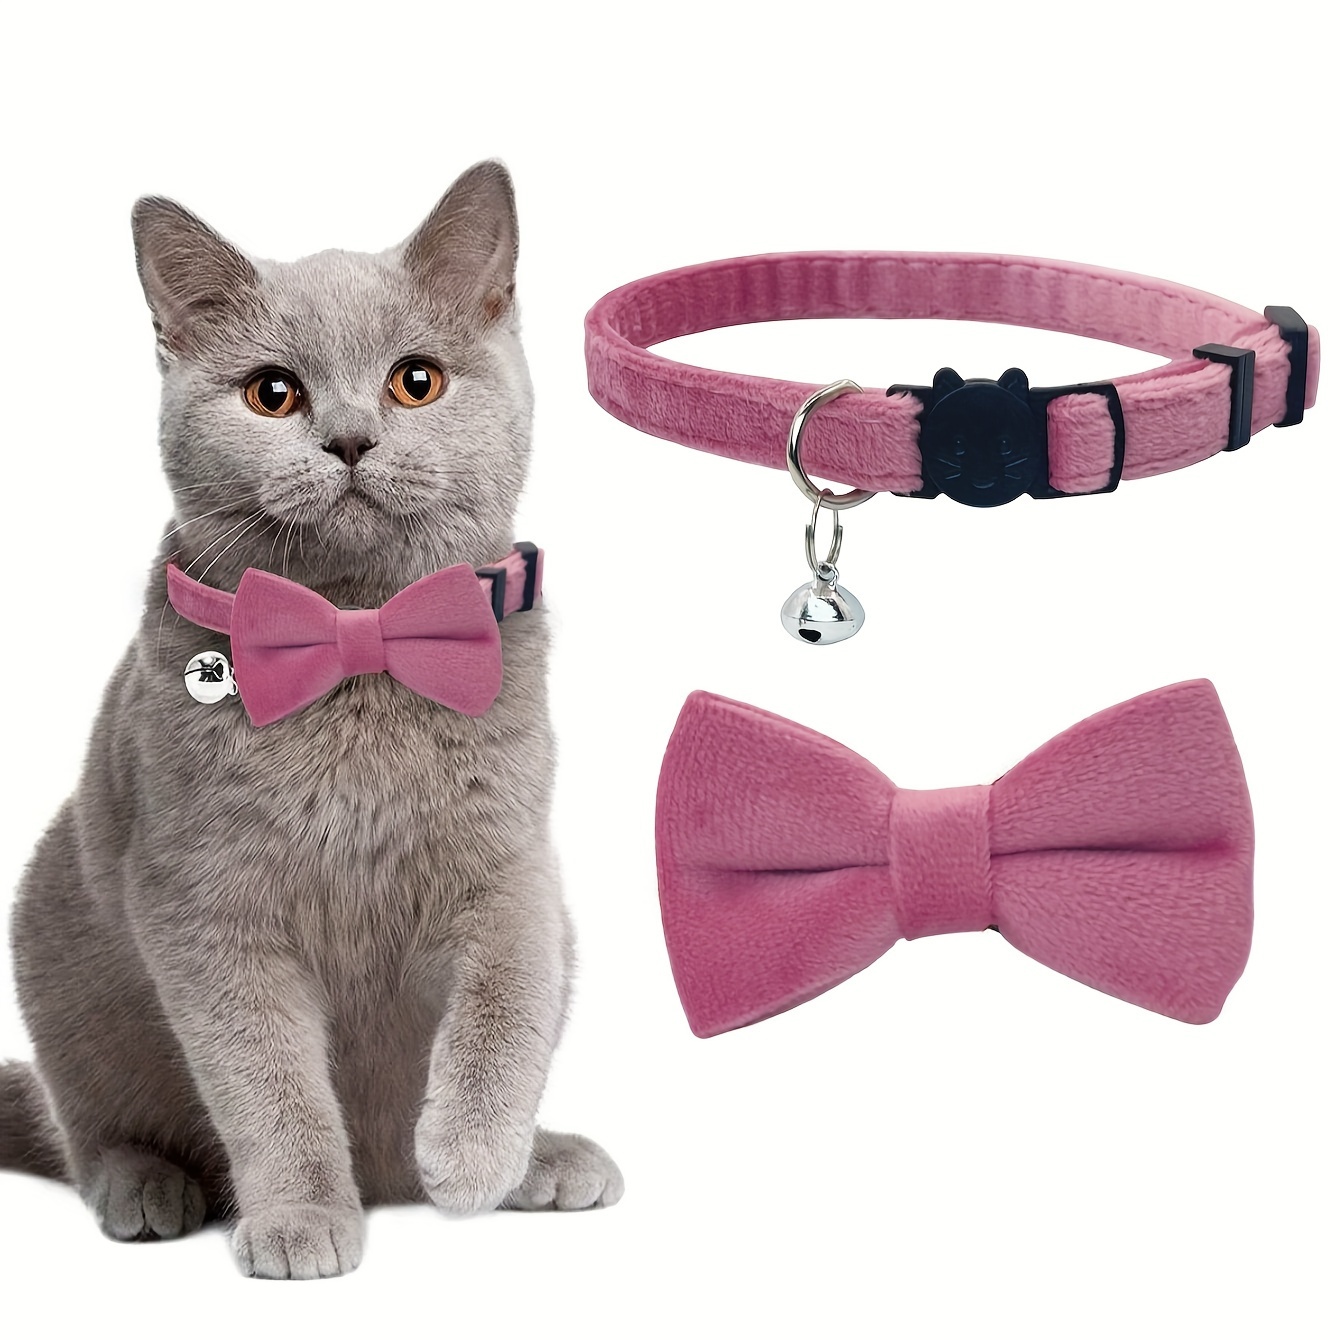 

Adjustable Polyester Fiber Pet Collar With Detachable Bowtie And Bell, Soft Plush Anti-choke Safety Buckle For Small To Medium Cats And Dogs, Includes 1 Charming Collar With Cartoon Design